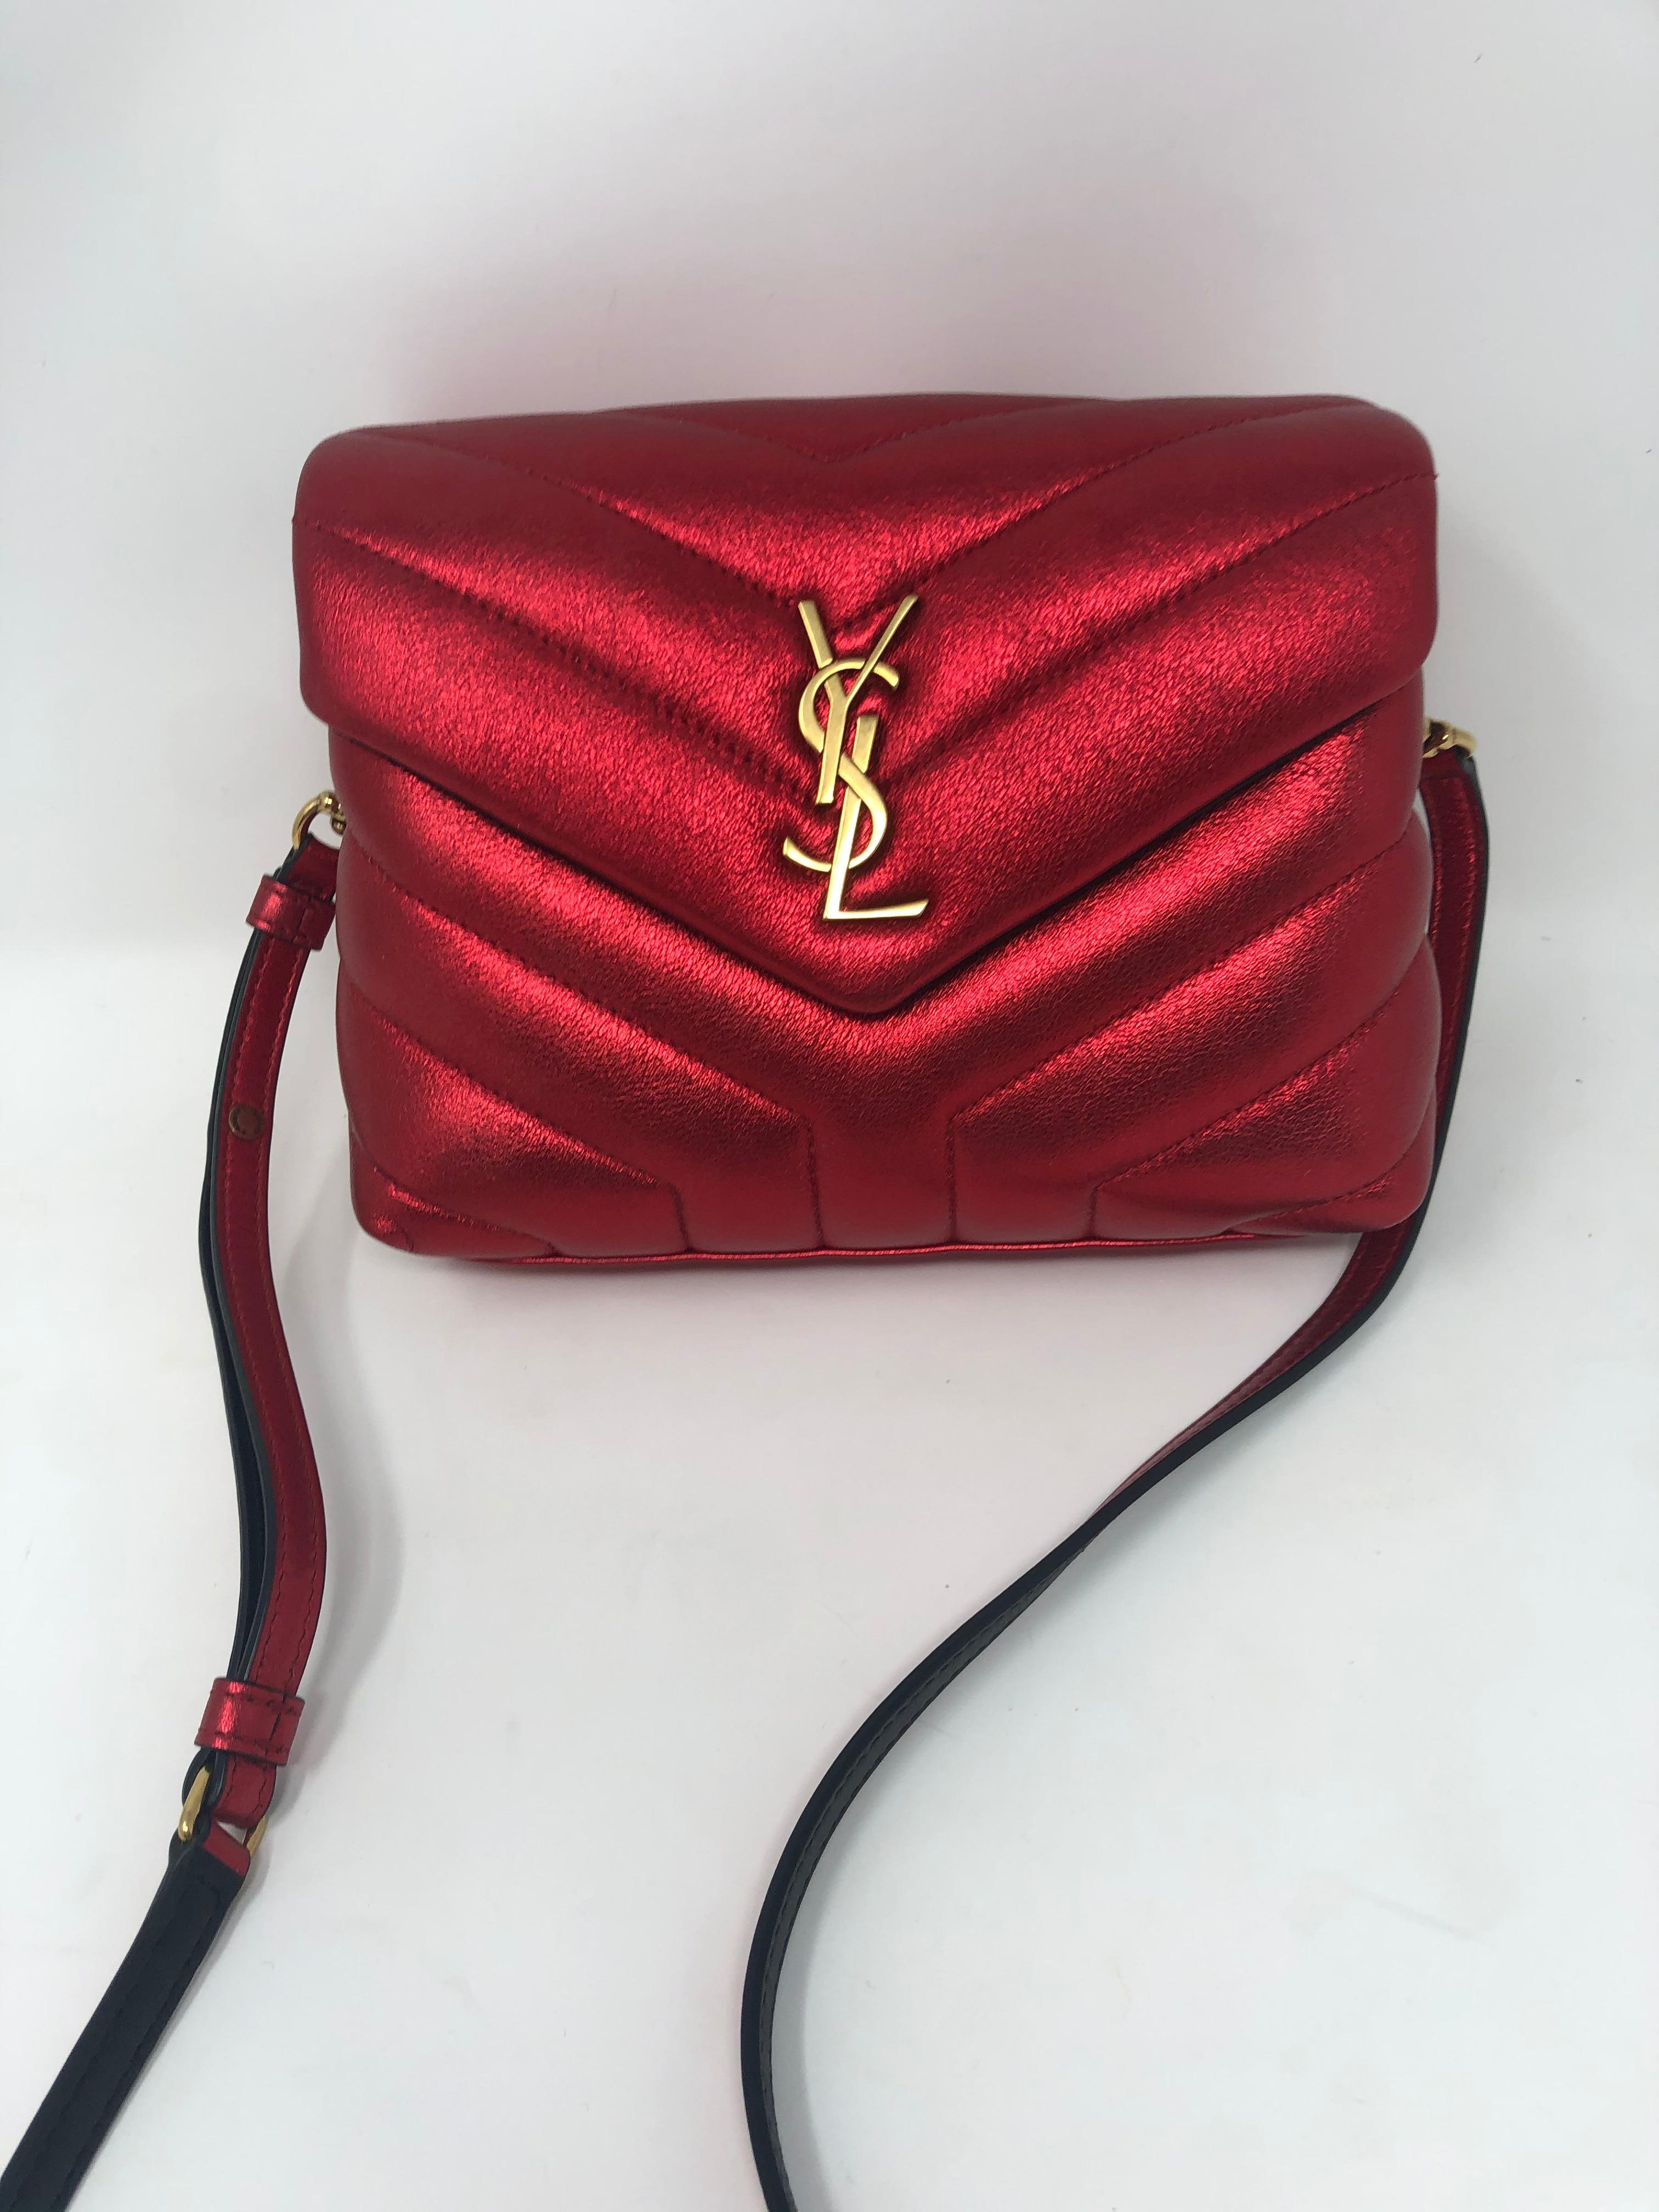 Saint Laurent Red Toy Loulou Matelasse Crossbody Bag. Retail $1650. Bag is brand new with tag. This is a more compact version of the Loulou bag. This bag can be worn as a crossbody or as a clutch. Bag has never been used. Guaranteed authentic. 